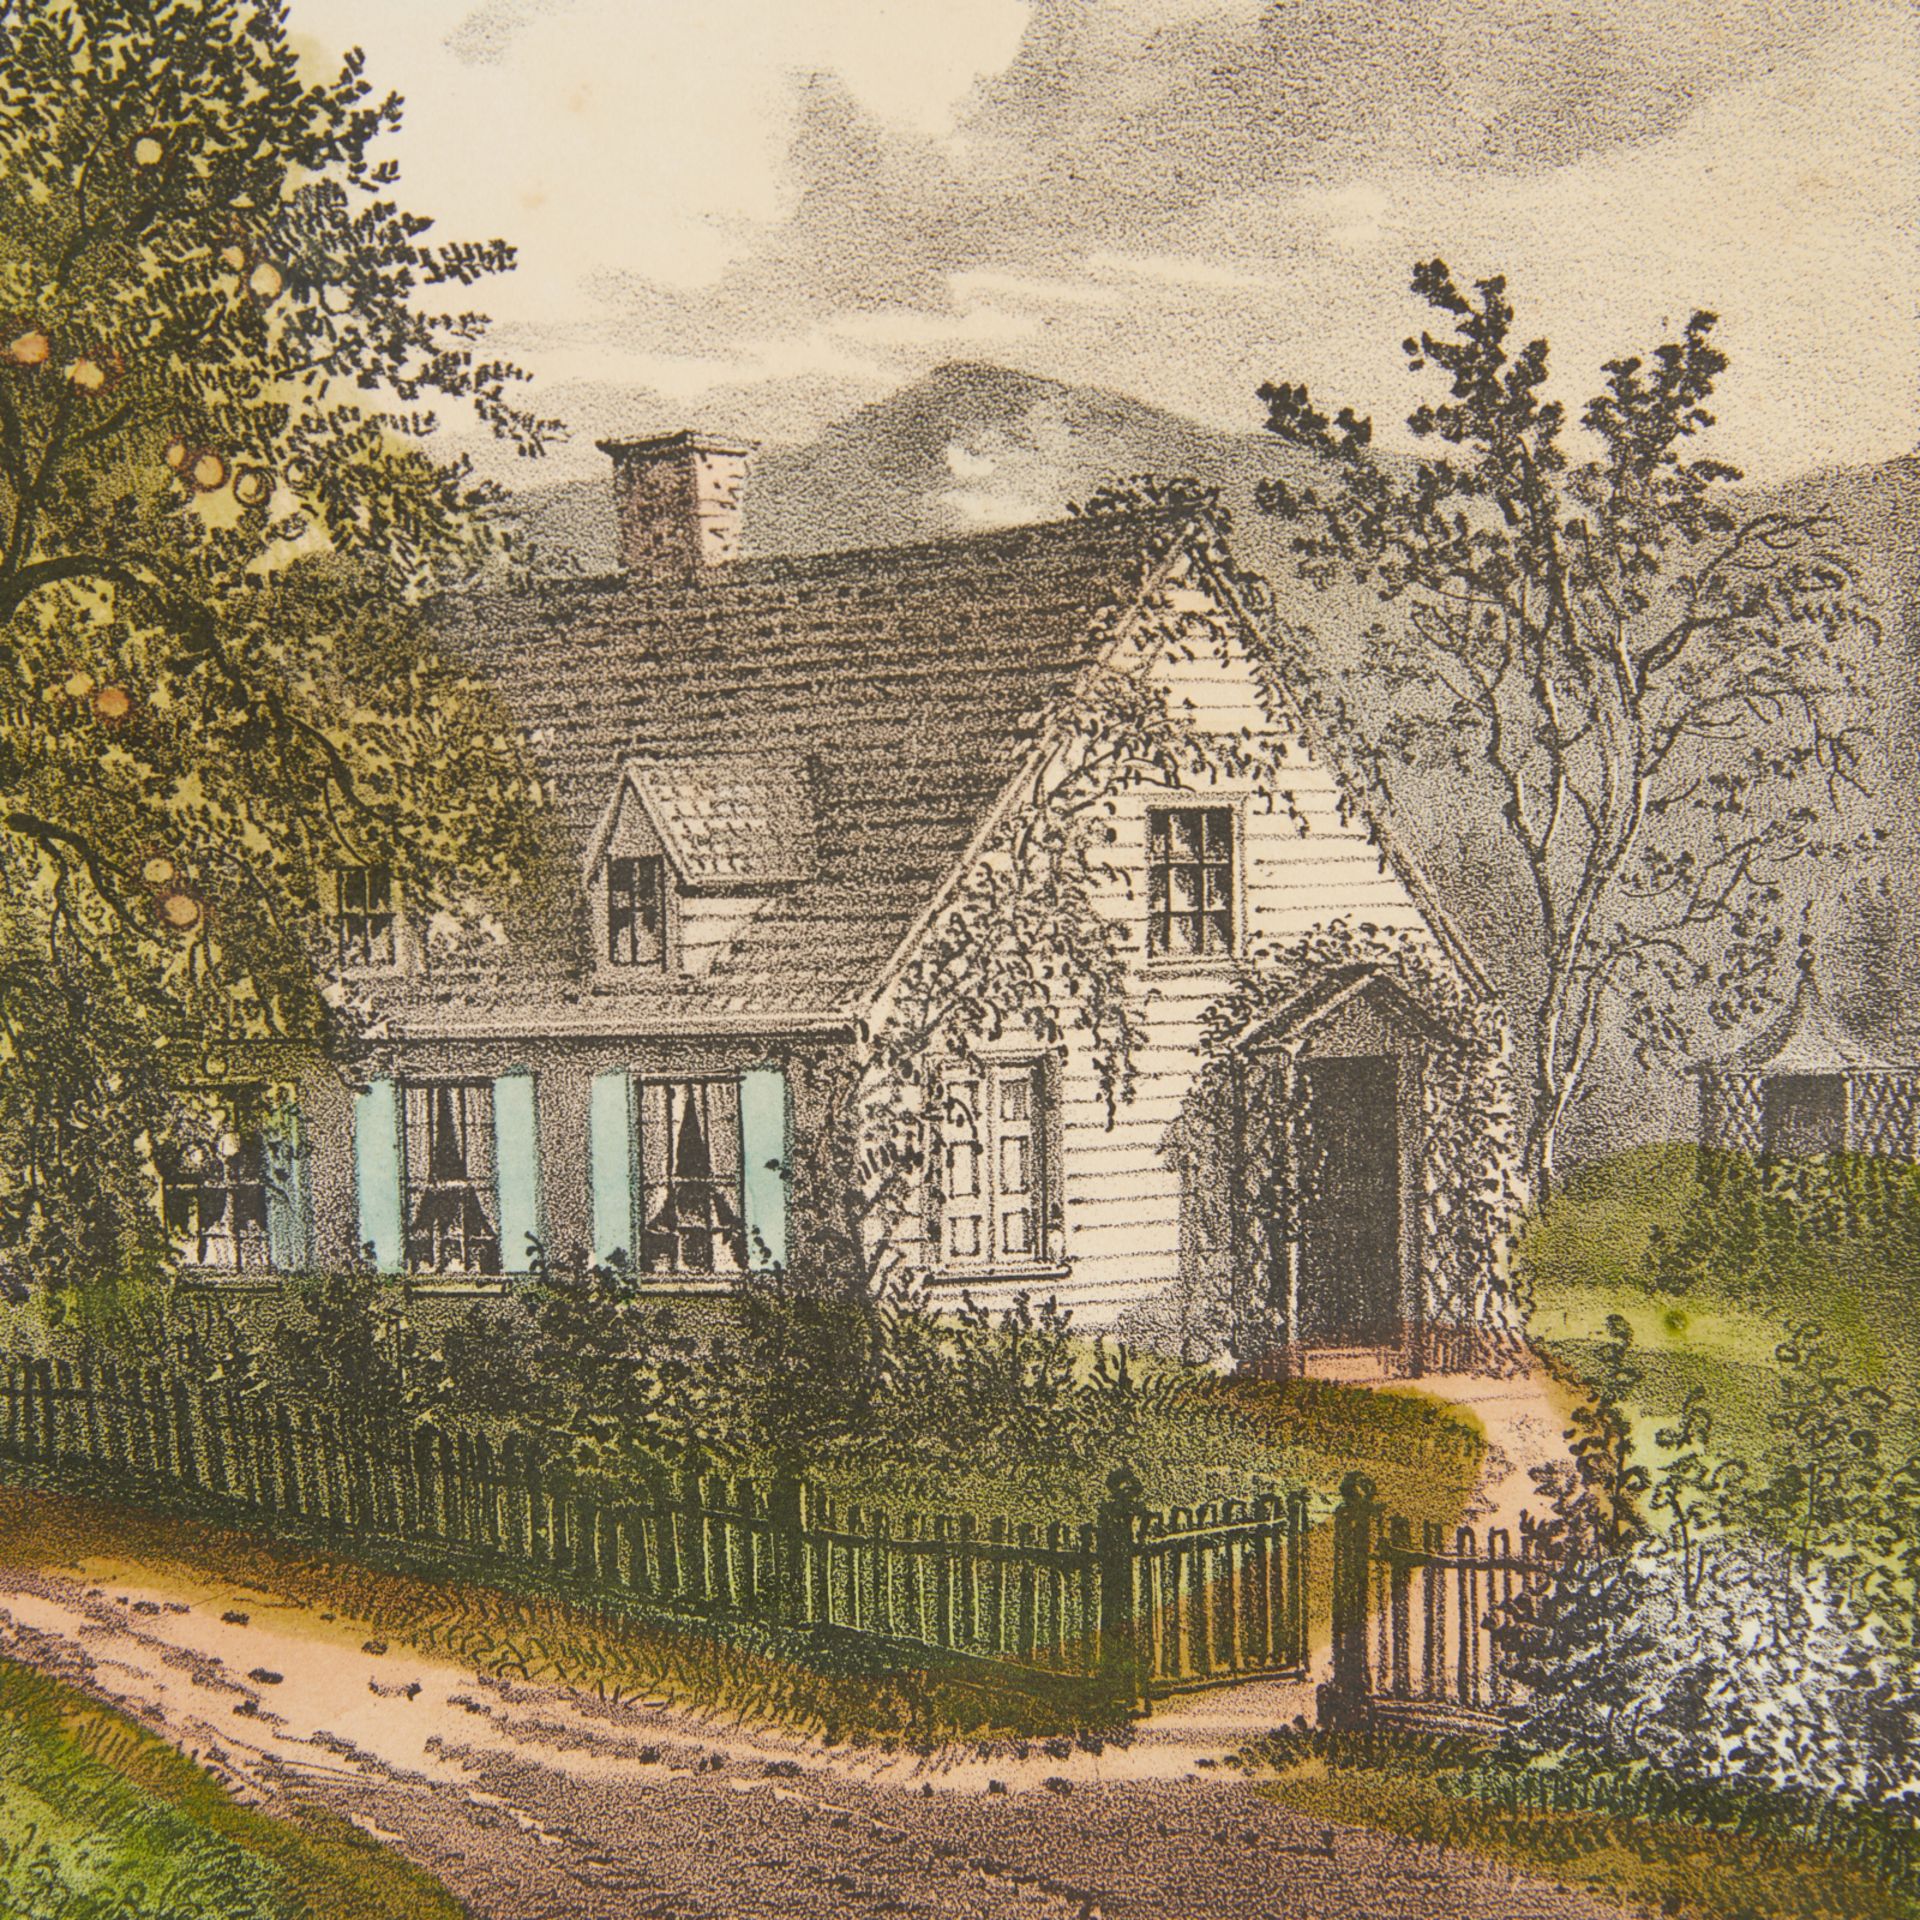 Currier & Ives "American Homestead Autumn" 1869 - Image 7 of 8